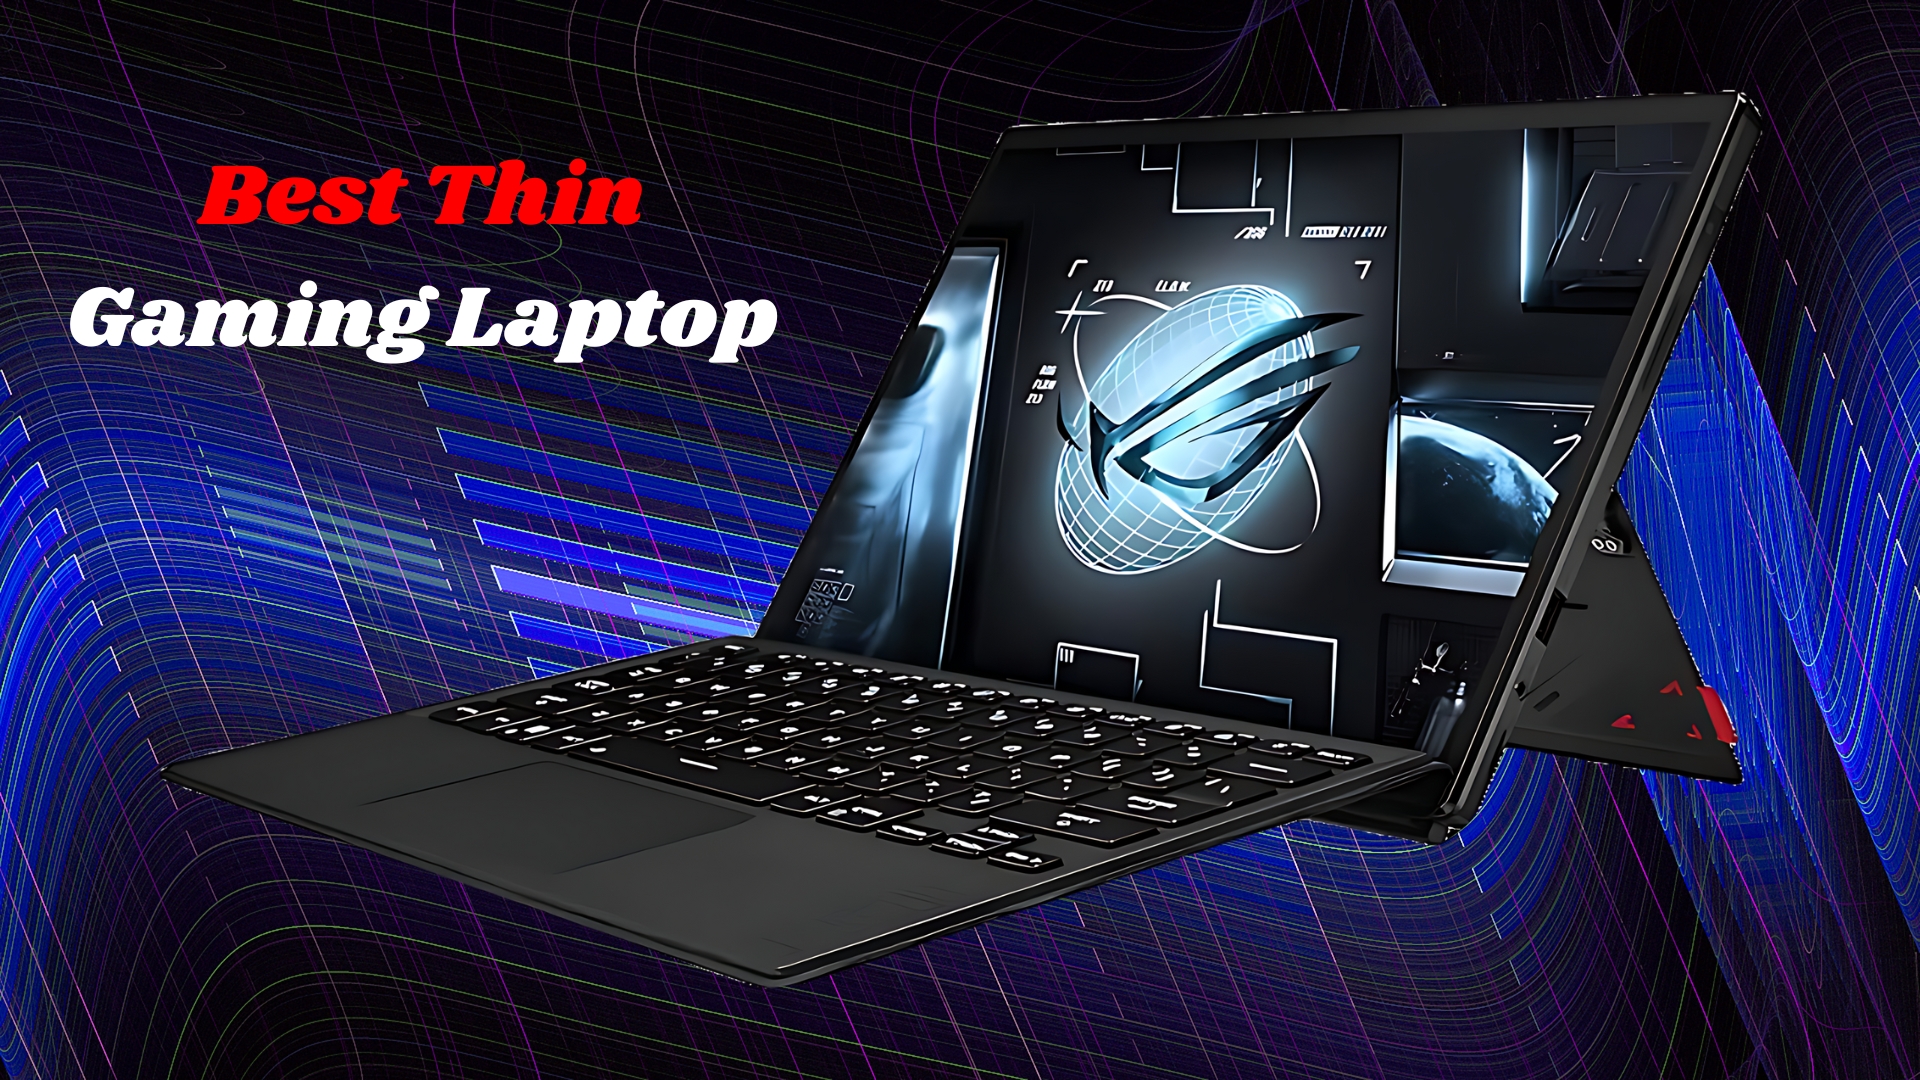 Best Thin Gaming Laptops: A Guide For Thin & Powerful Laptop